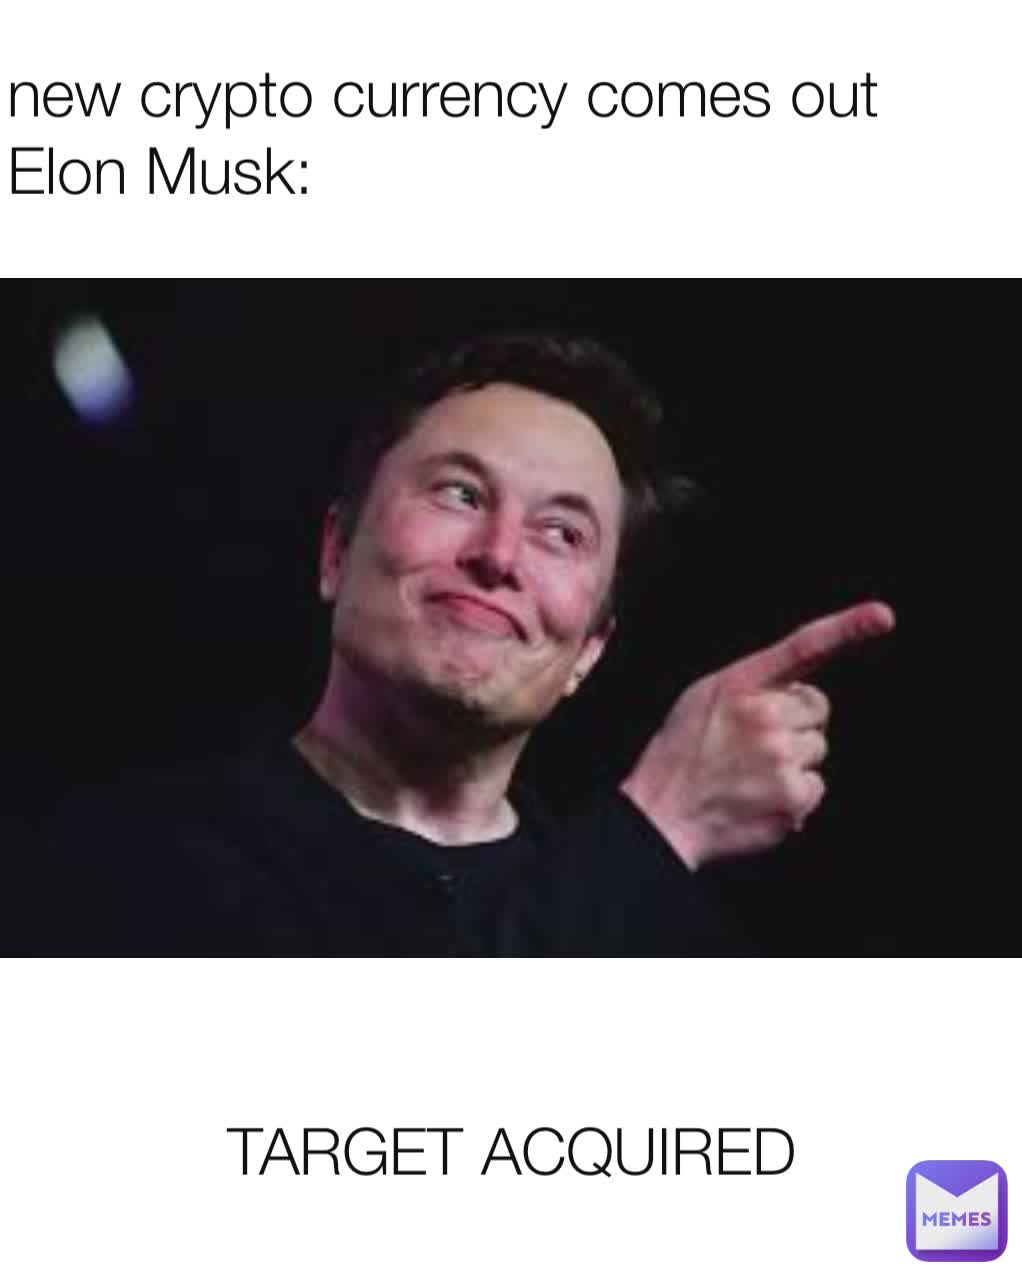 new crypto currency comes out
Elon Musk: TARGET ACQUIRED